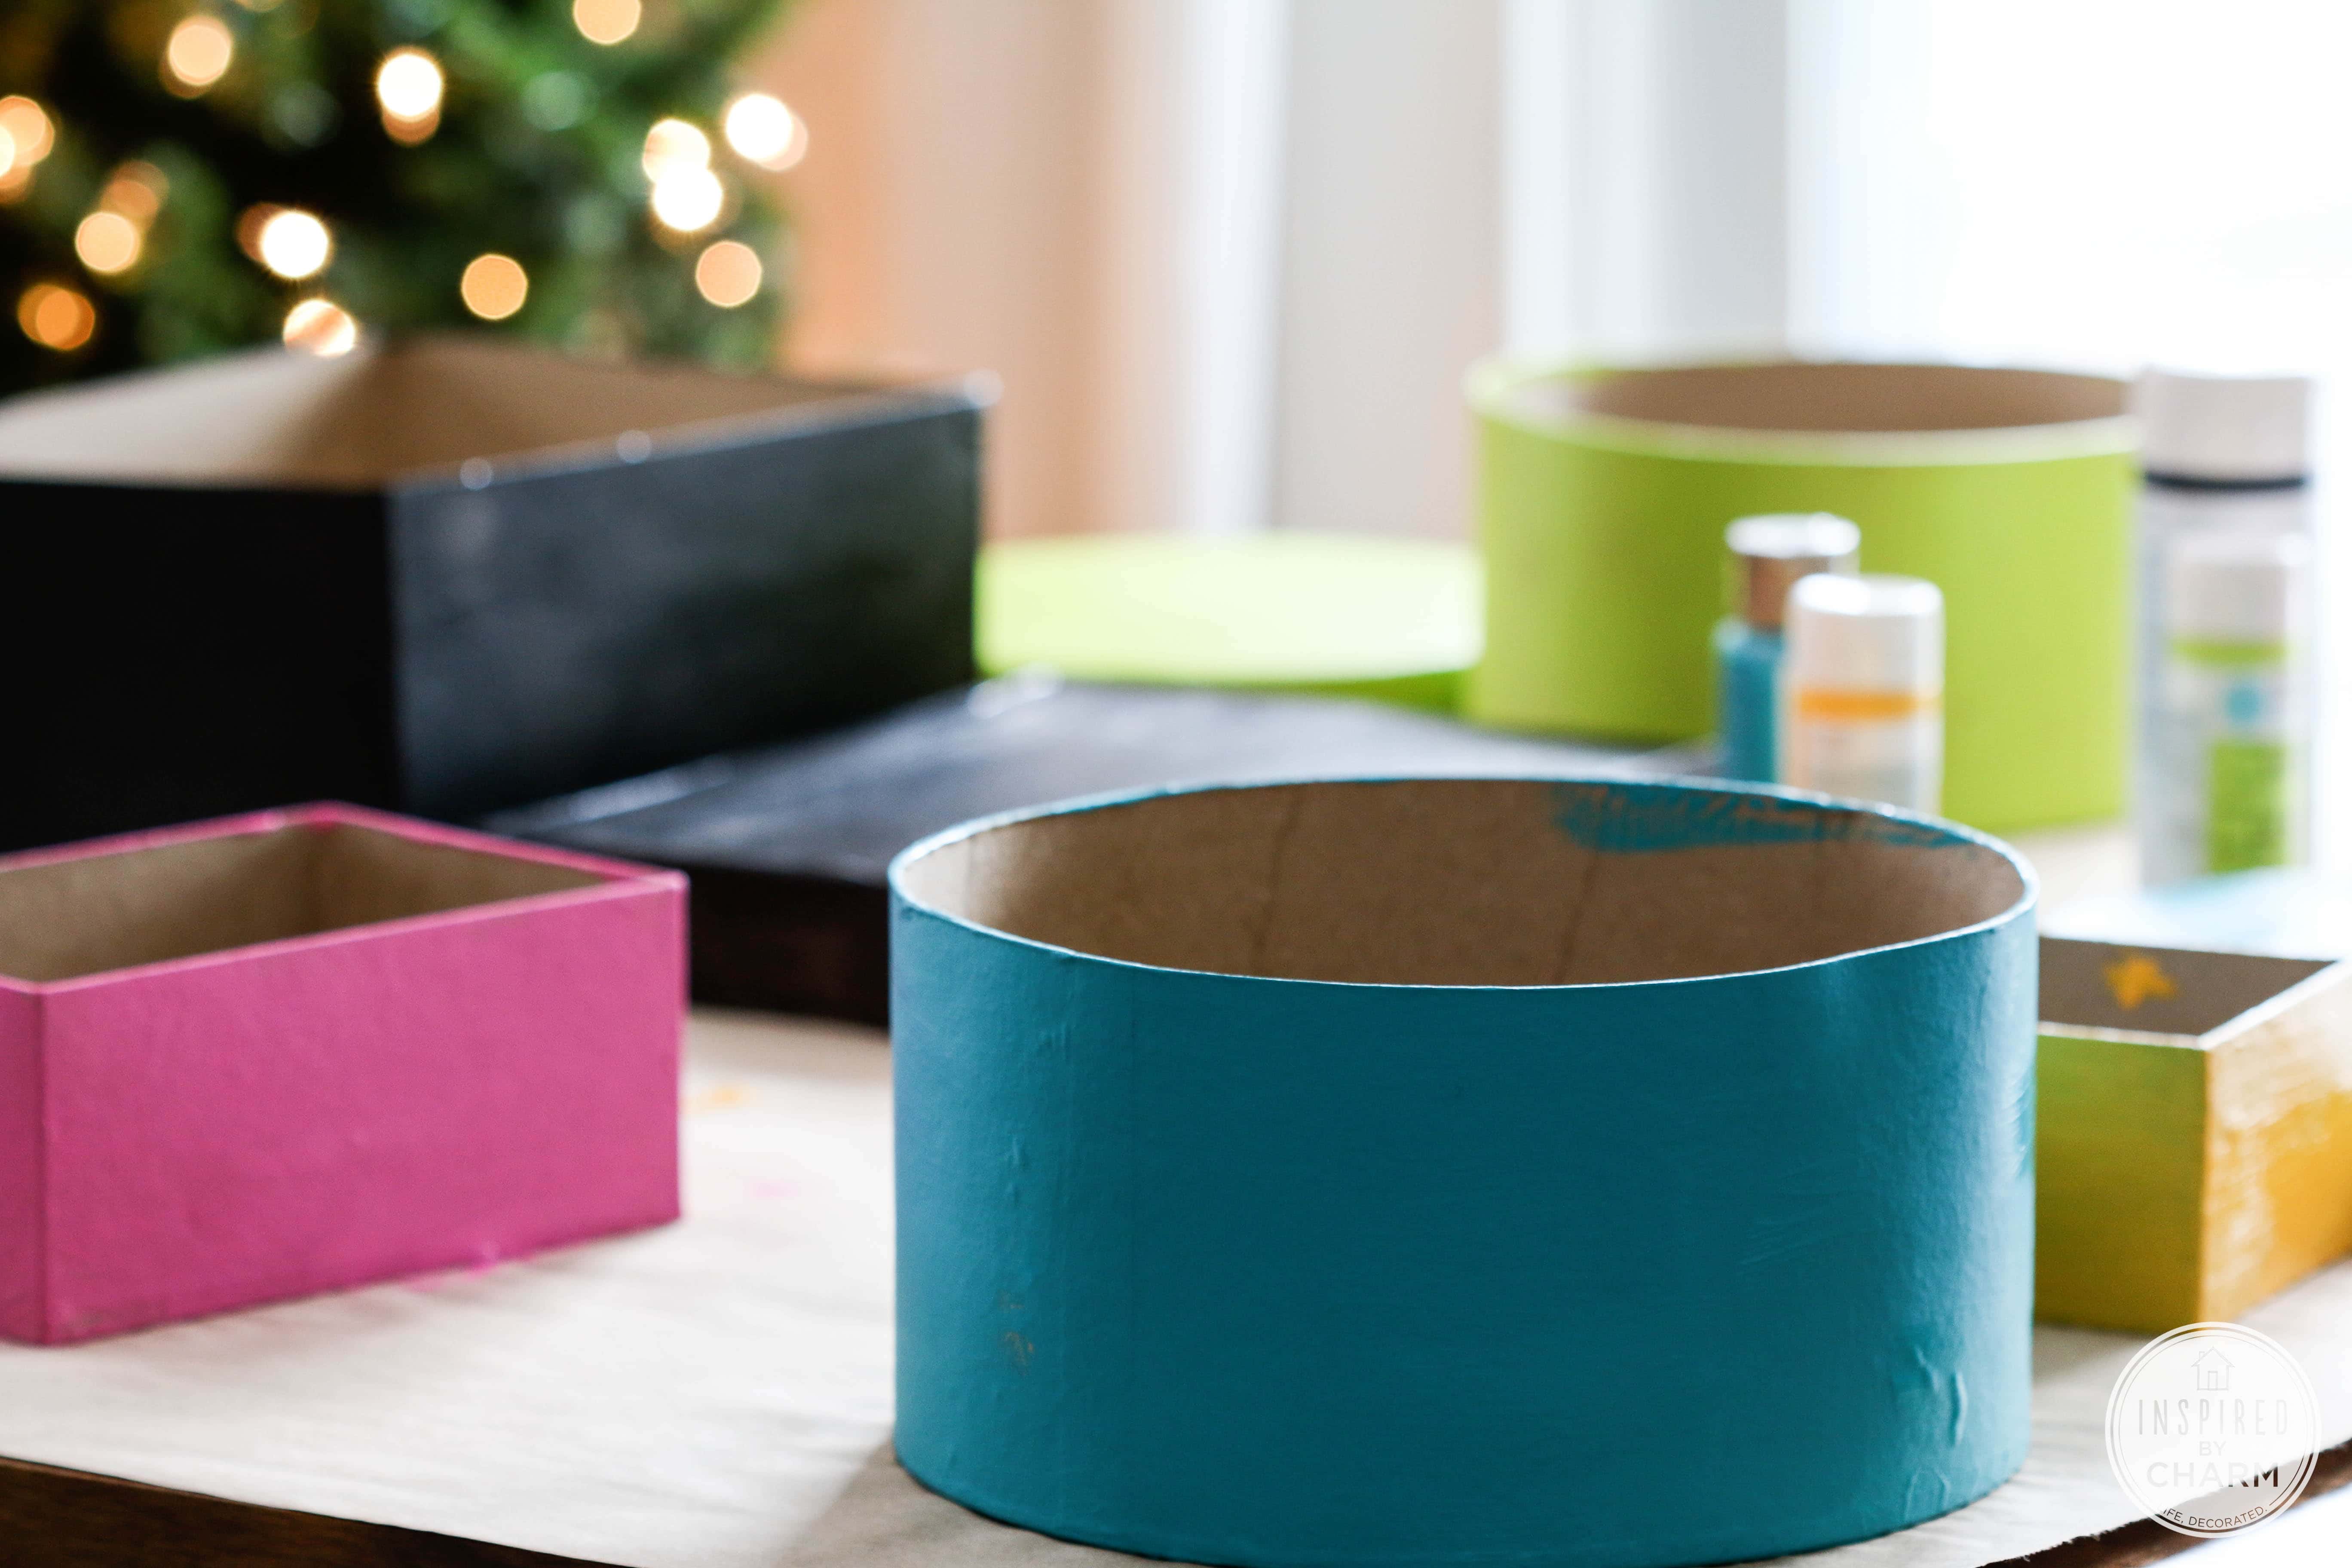 DIY Gold-Leafed Holiday Boxes